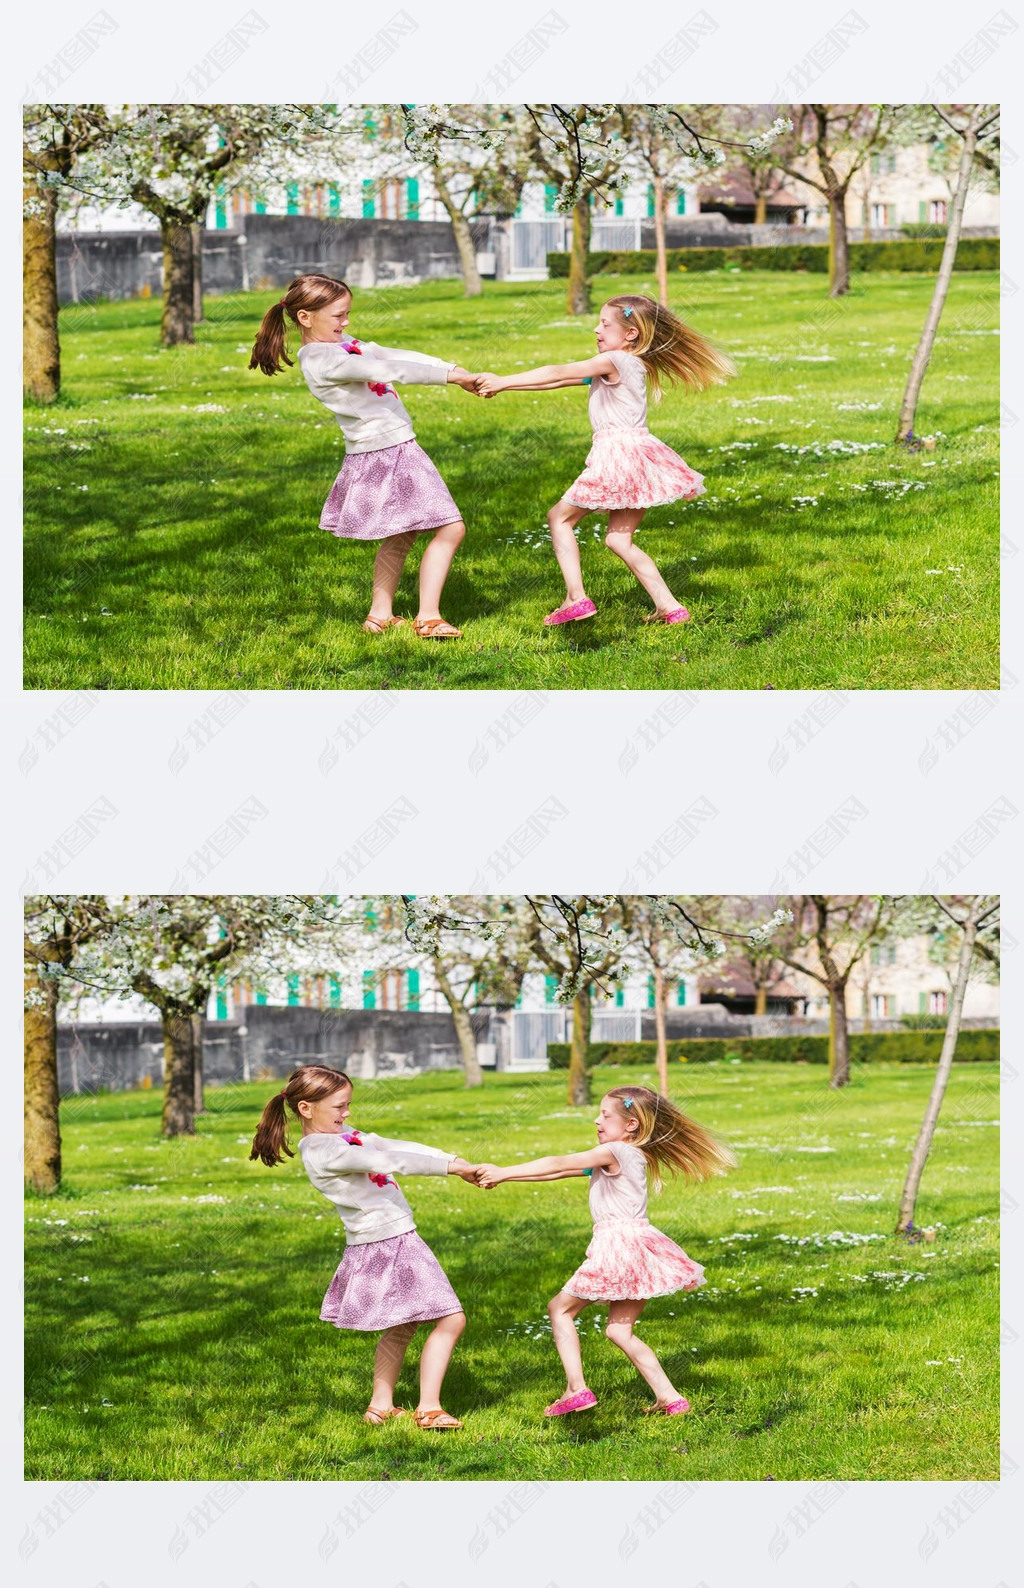 Two little girls playing in spring garden on a nice sunny warm day, wearing skirts